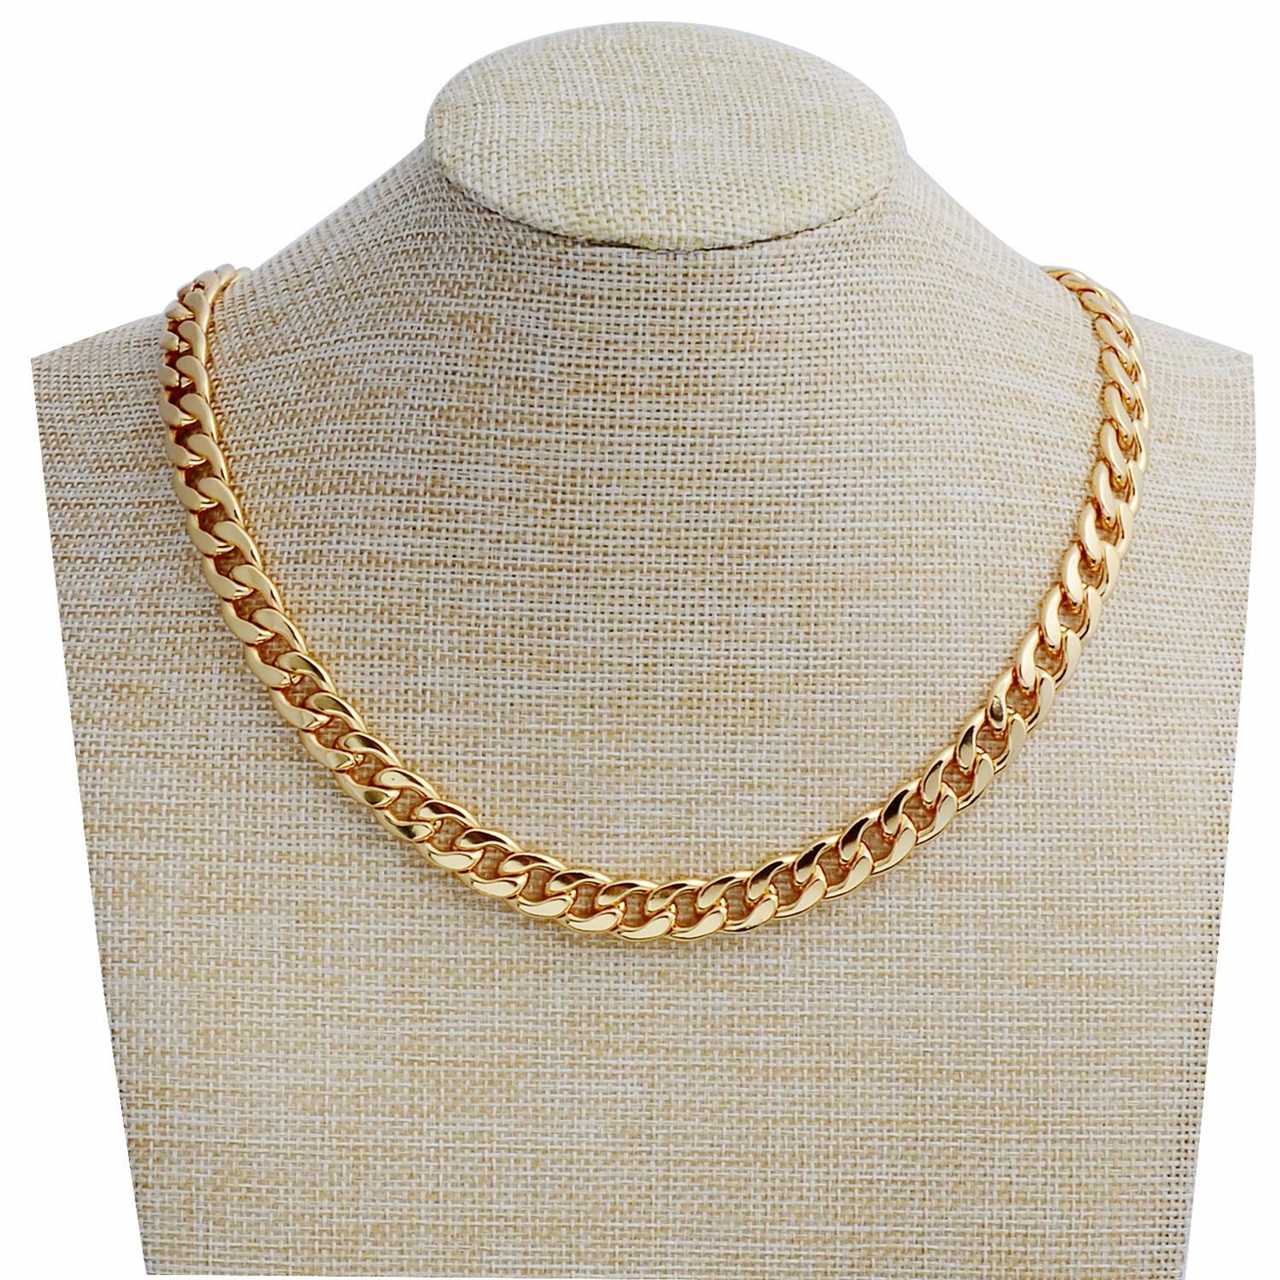 Easy and Effective Ways to Clean Your Gold Chain